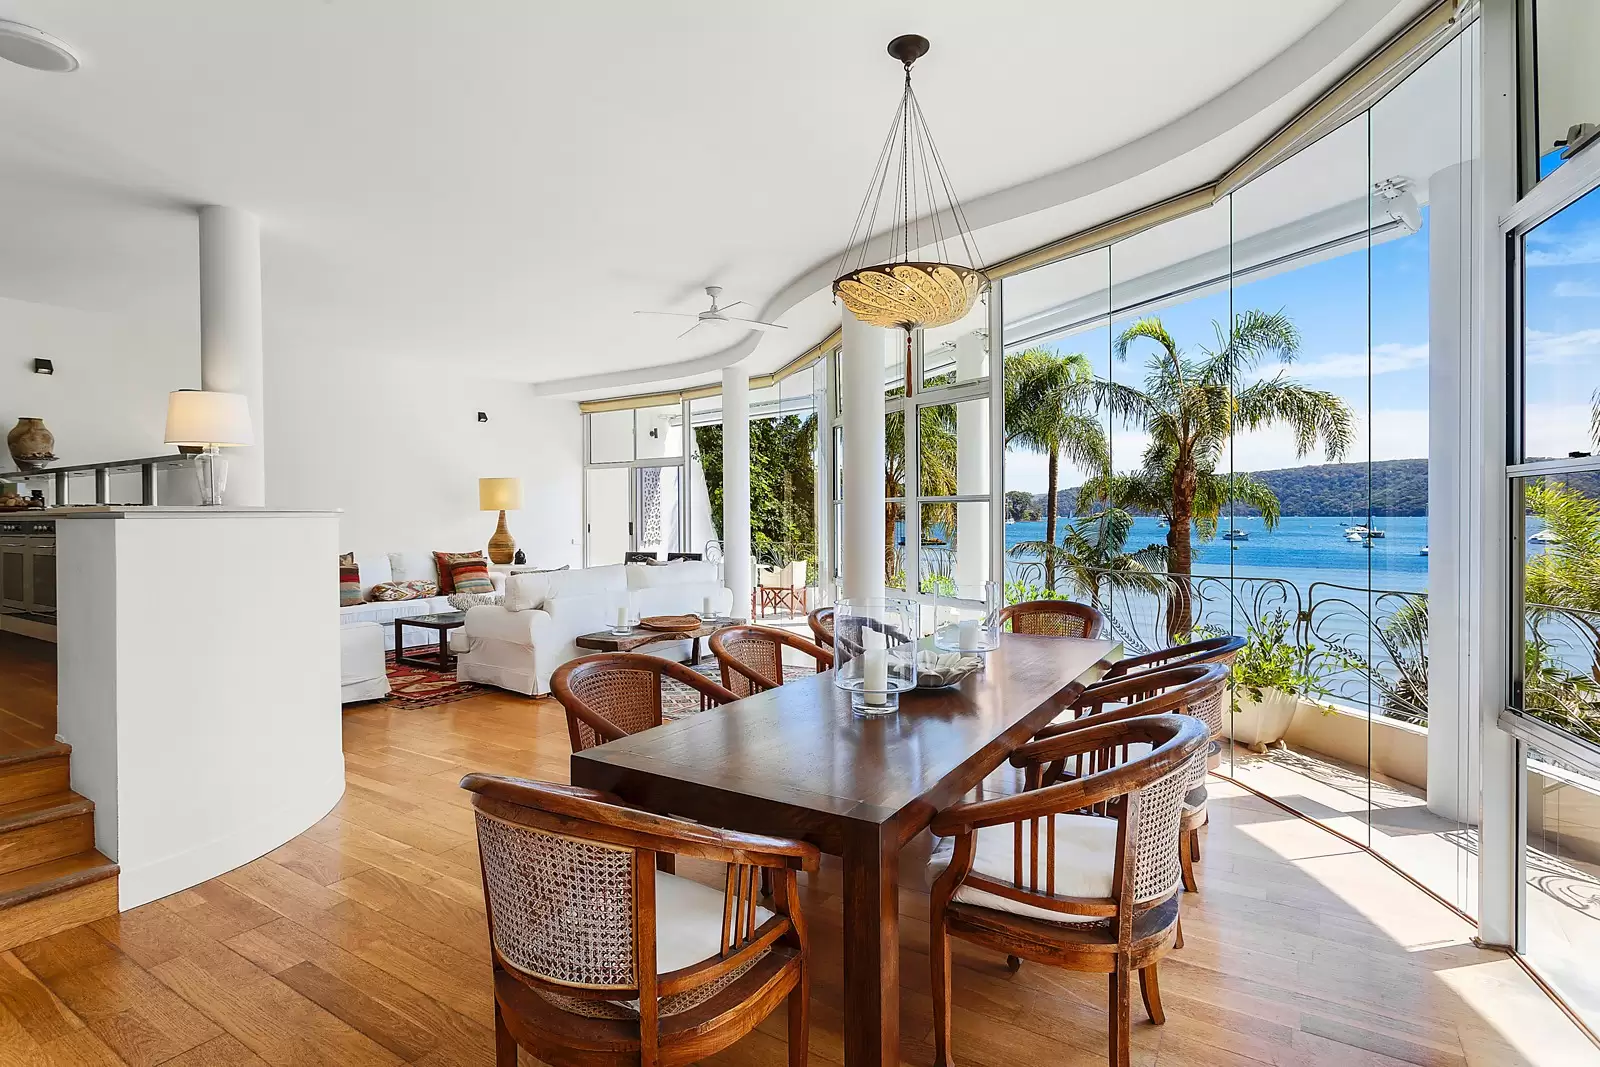 Photo #5: 25 Thyra Road, Palm Beach - Sold by Sydney Sotheby's International Realty